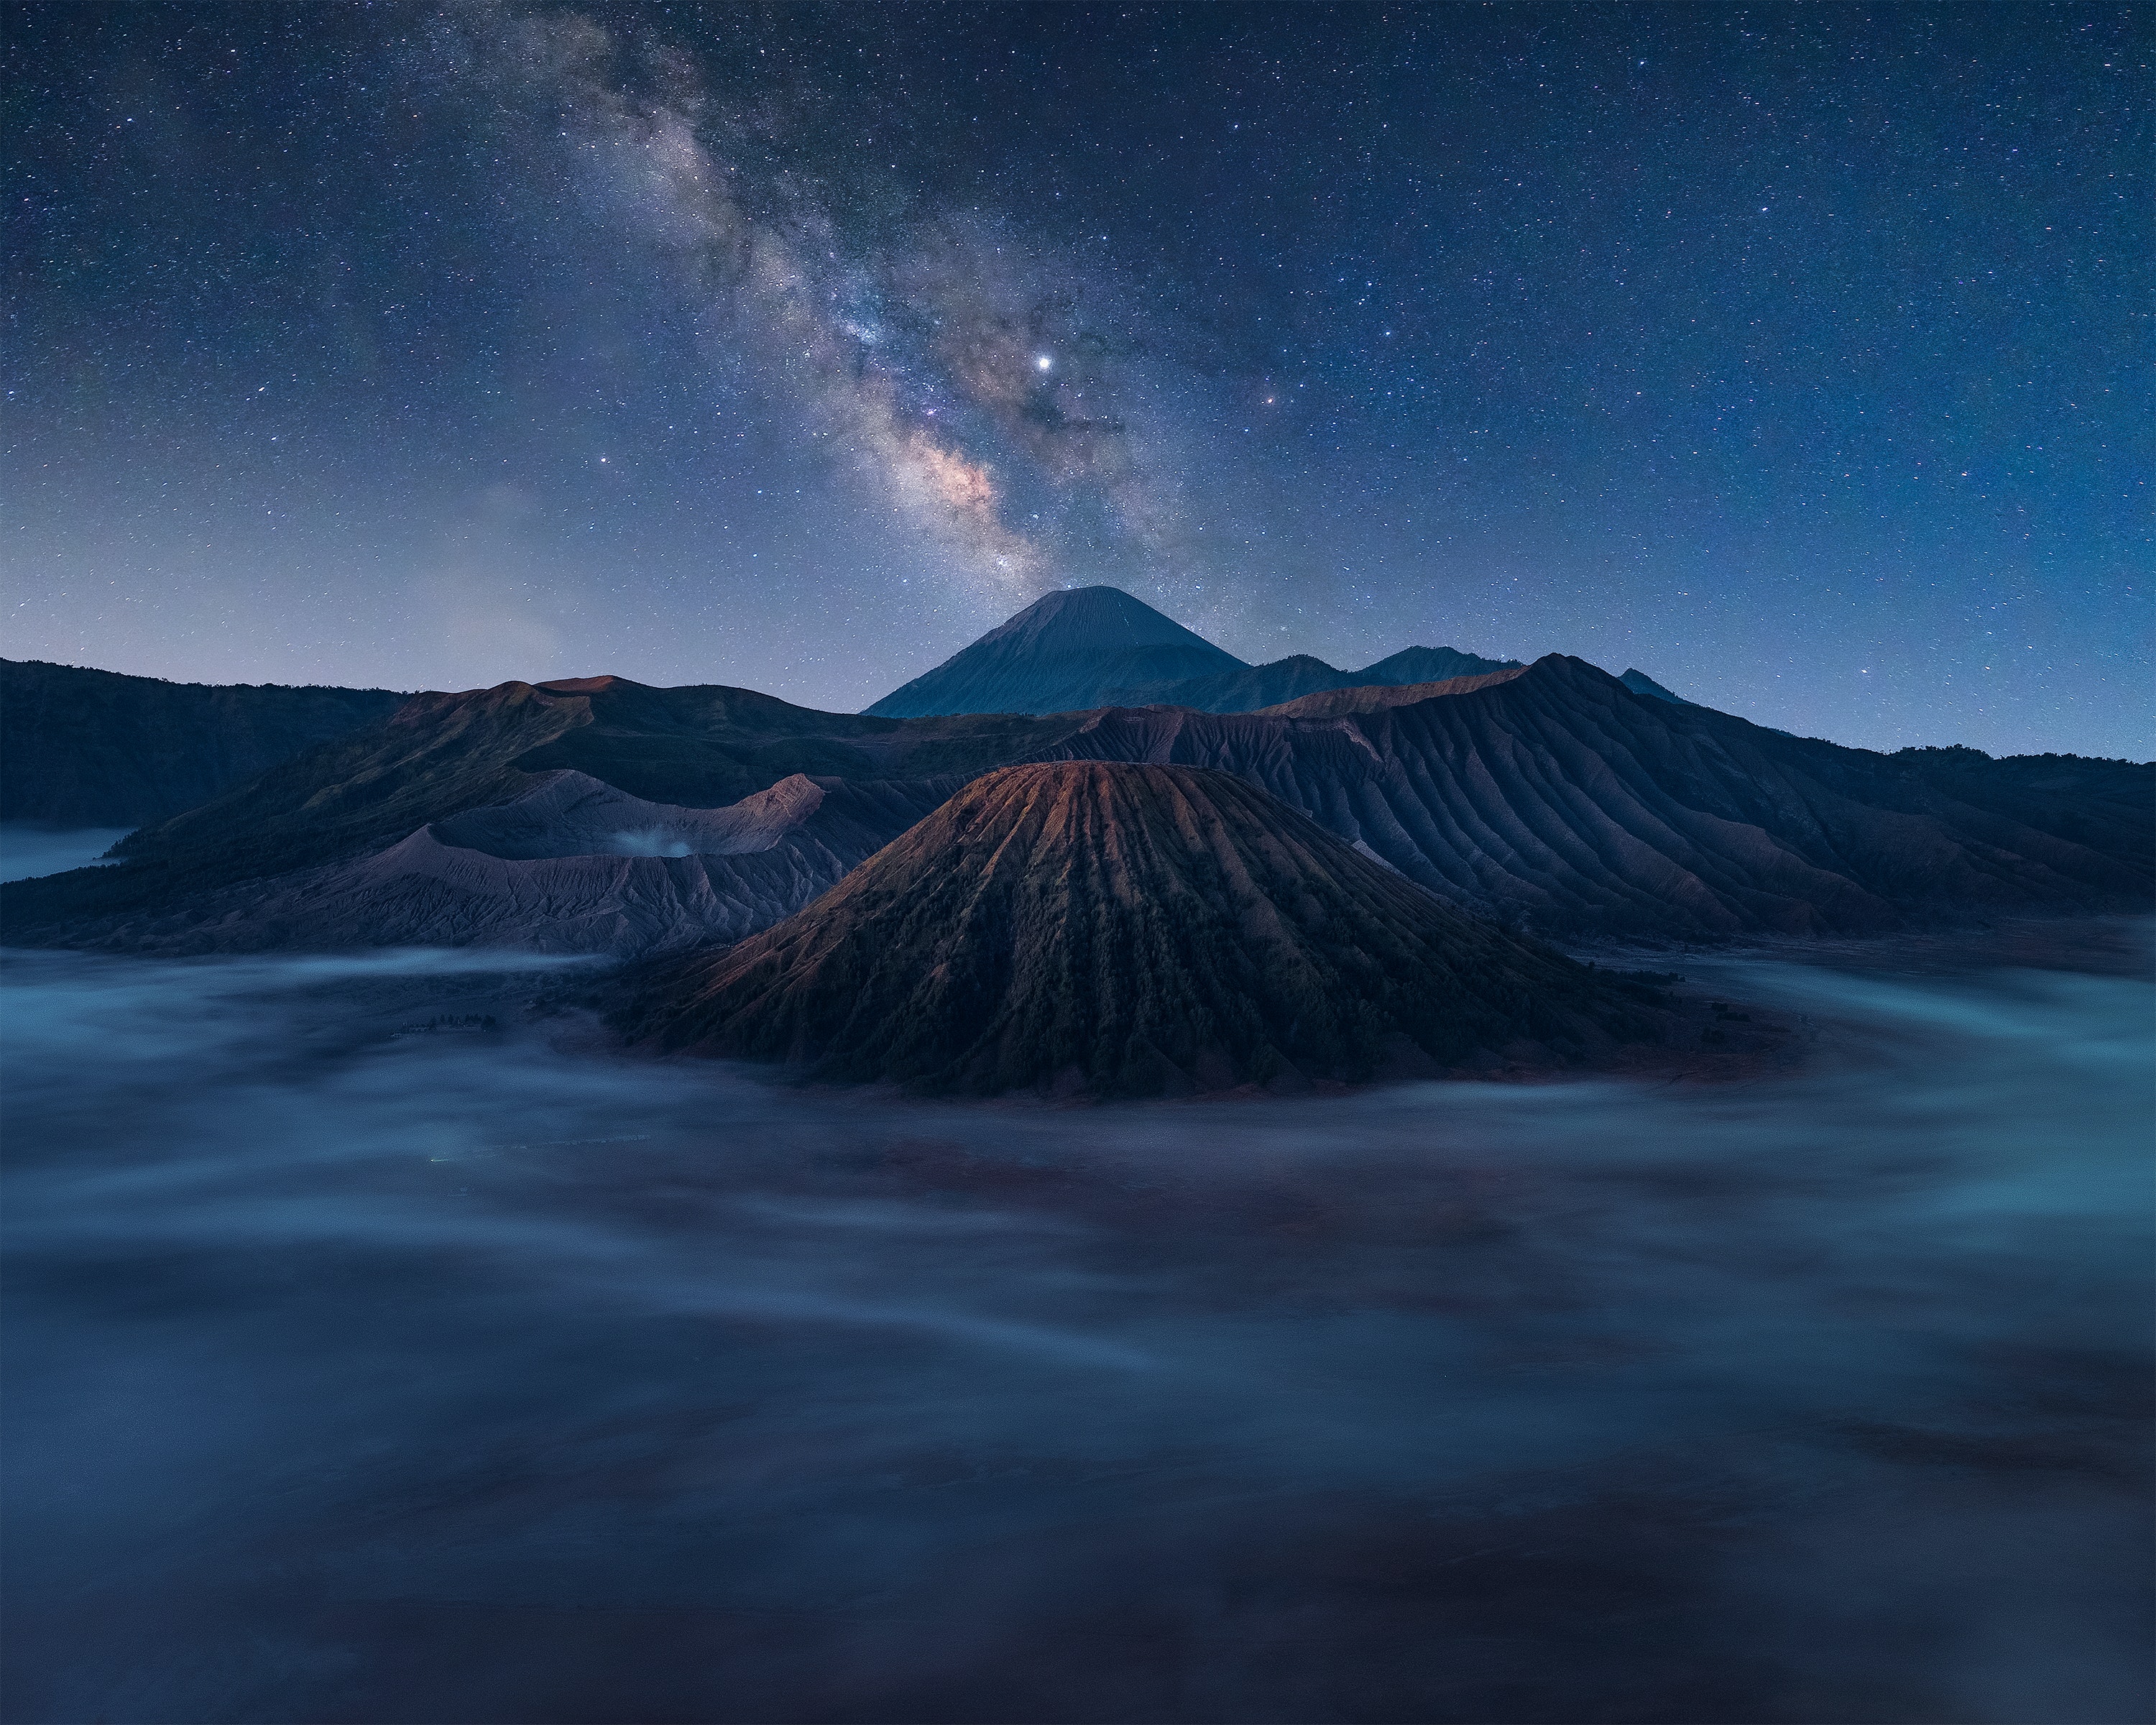 General 3000x2400 nightscape landscape volcano photography nature mountains stars Mount Bromo Indonesia mist low light